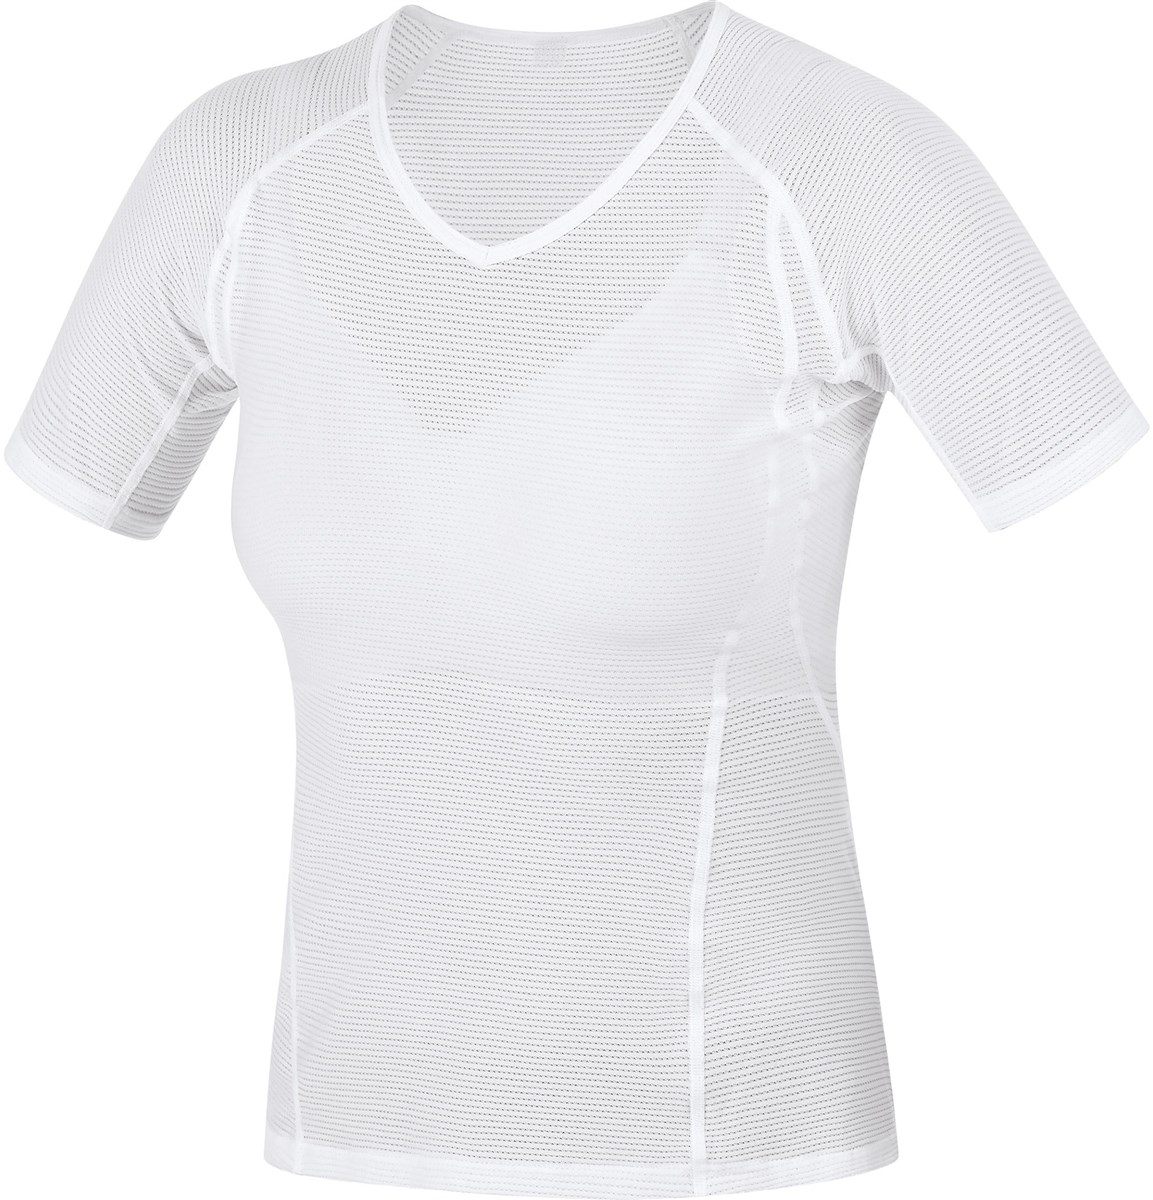 Gore Womens Short Sleeve Base Layer AW17 product image